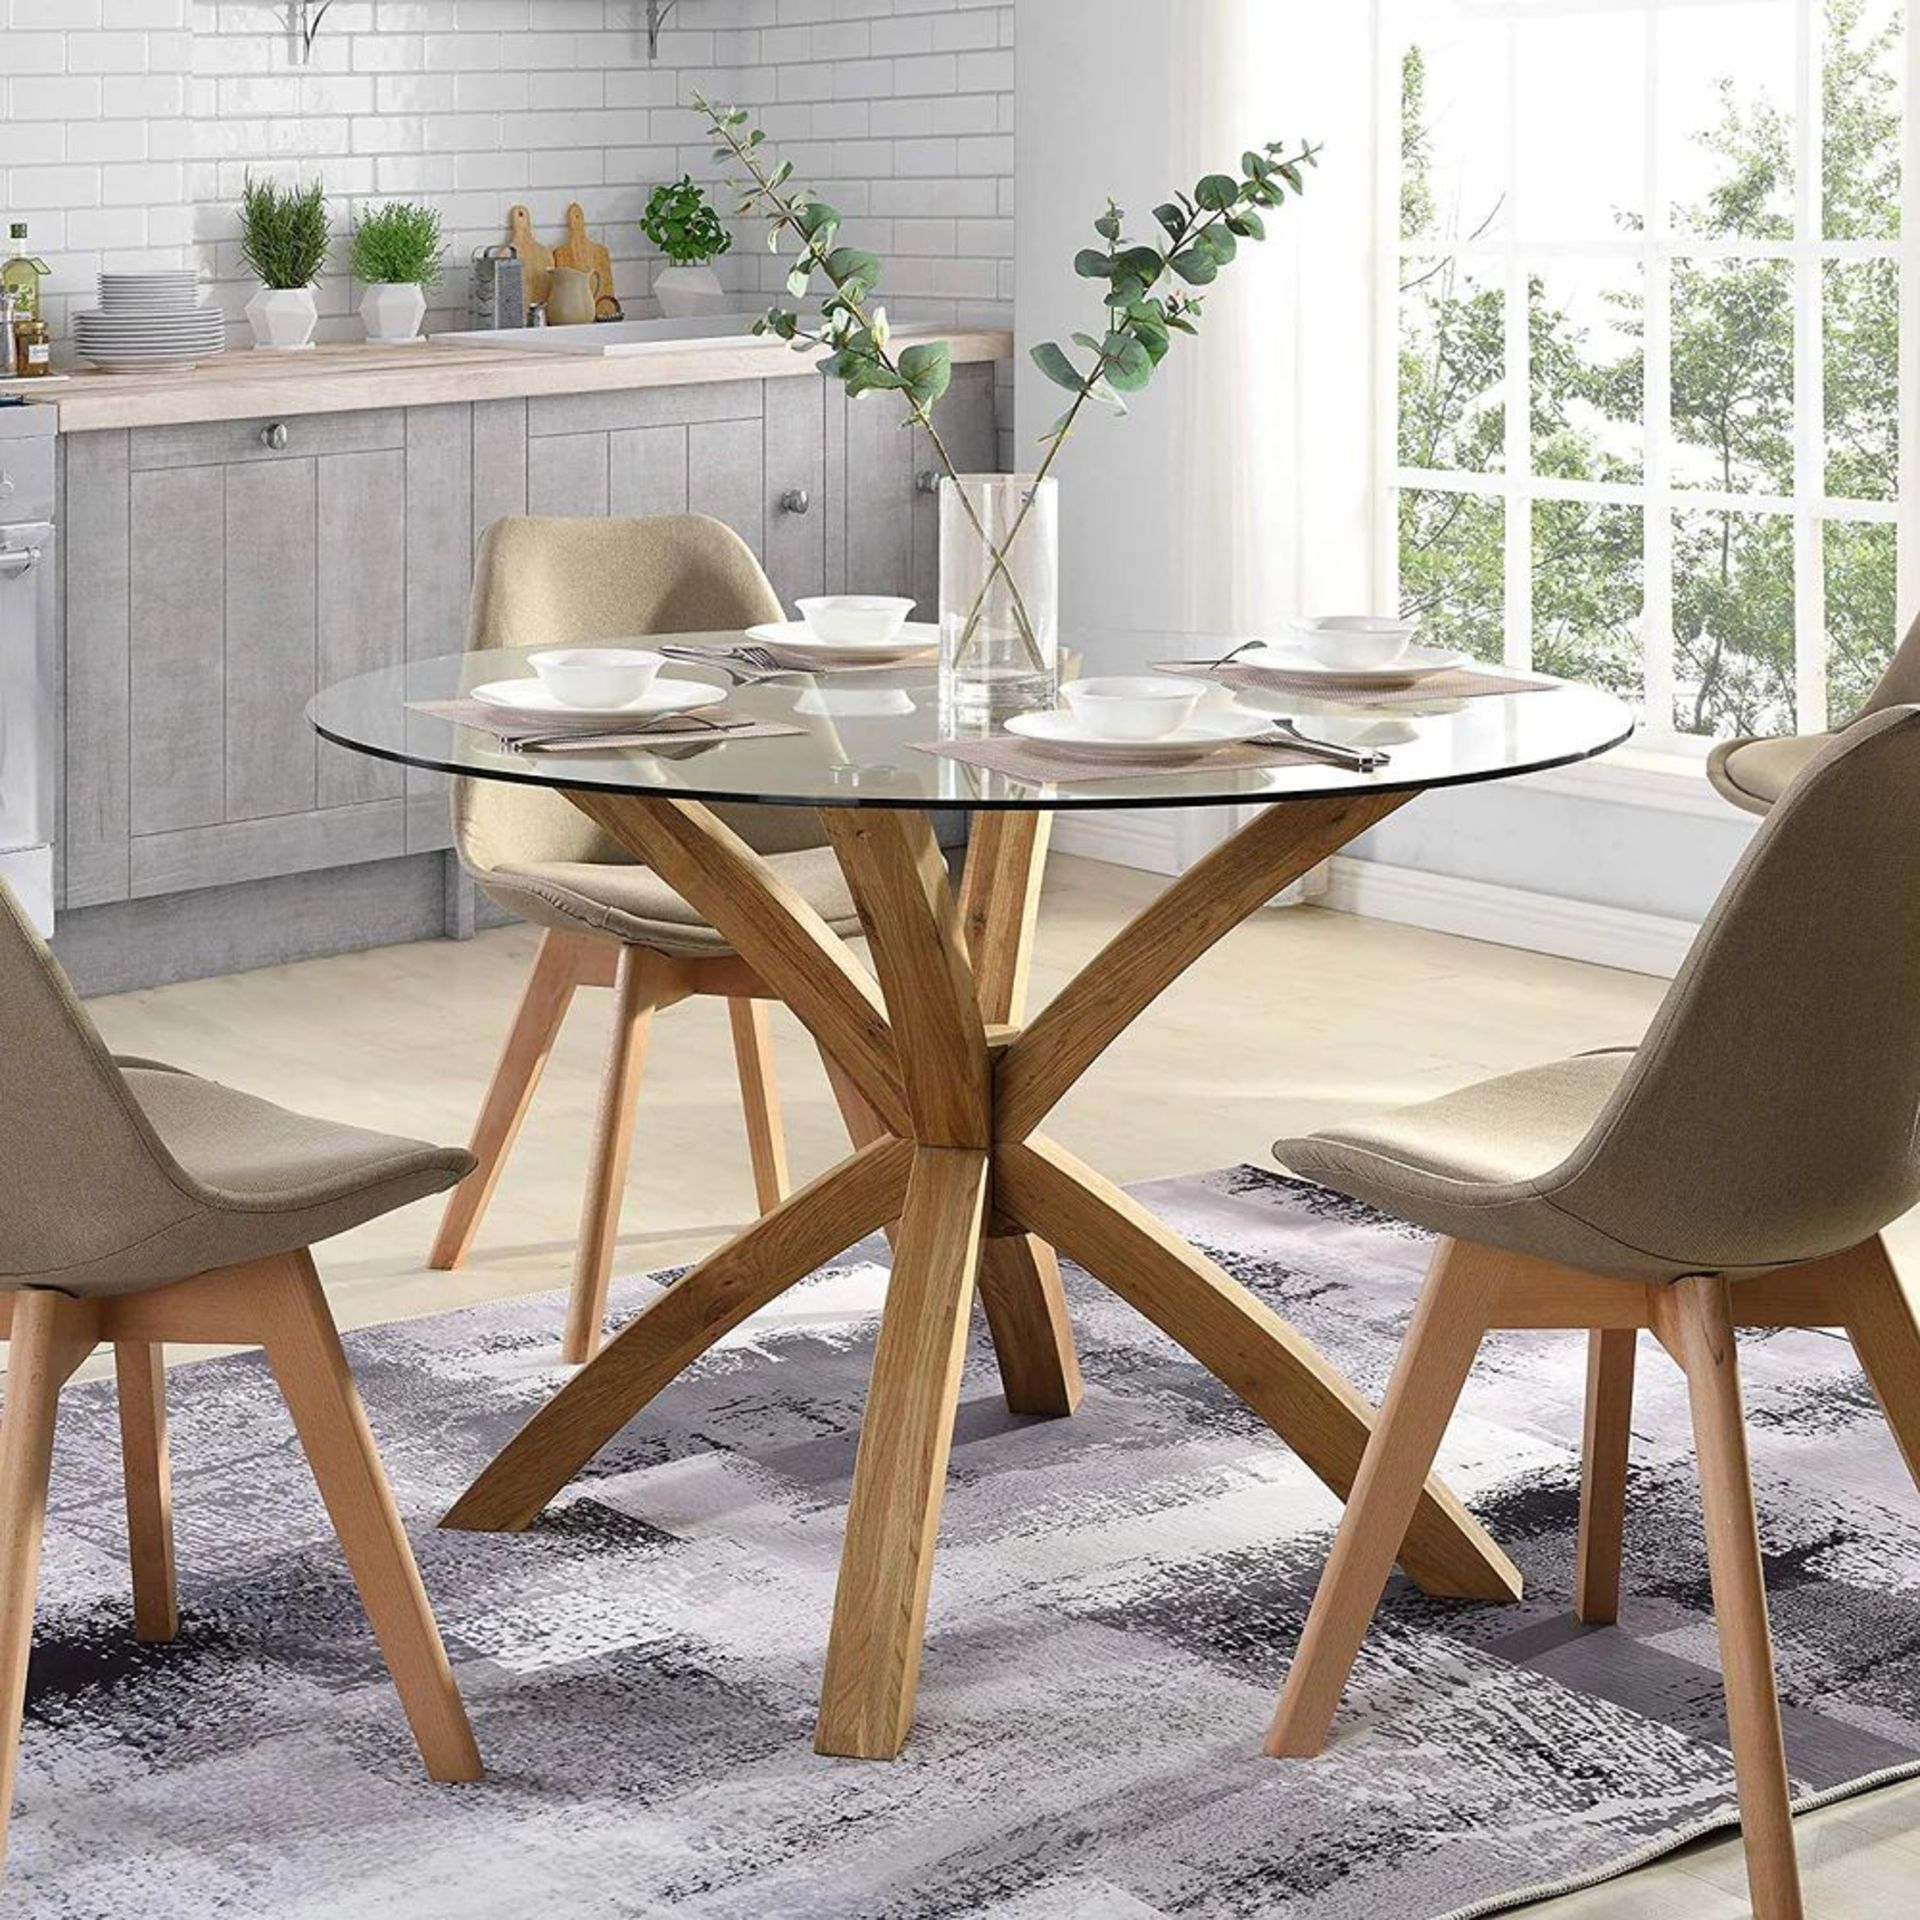 Lugano 110cm Round Glass Top Solid Oak Legs Dining Table. - BI. RRP £379.99. Featuring four subtly